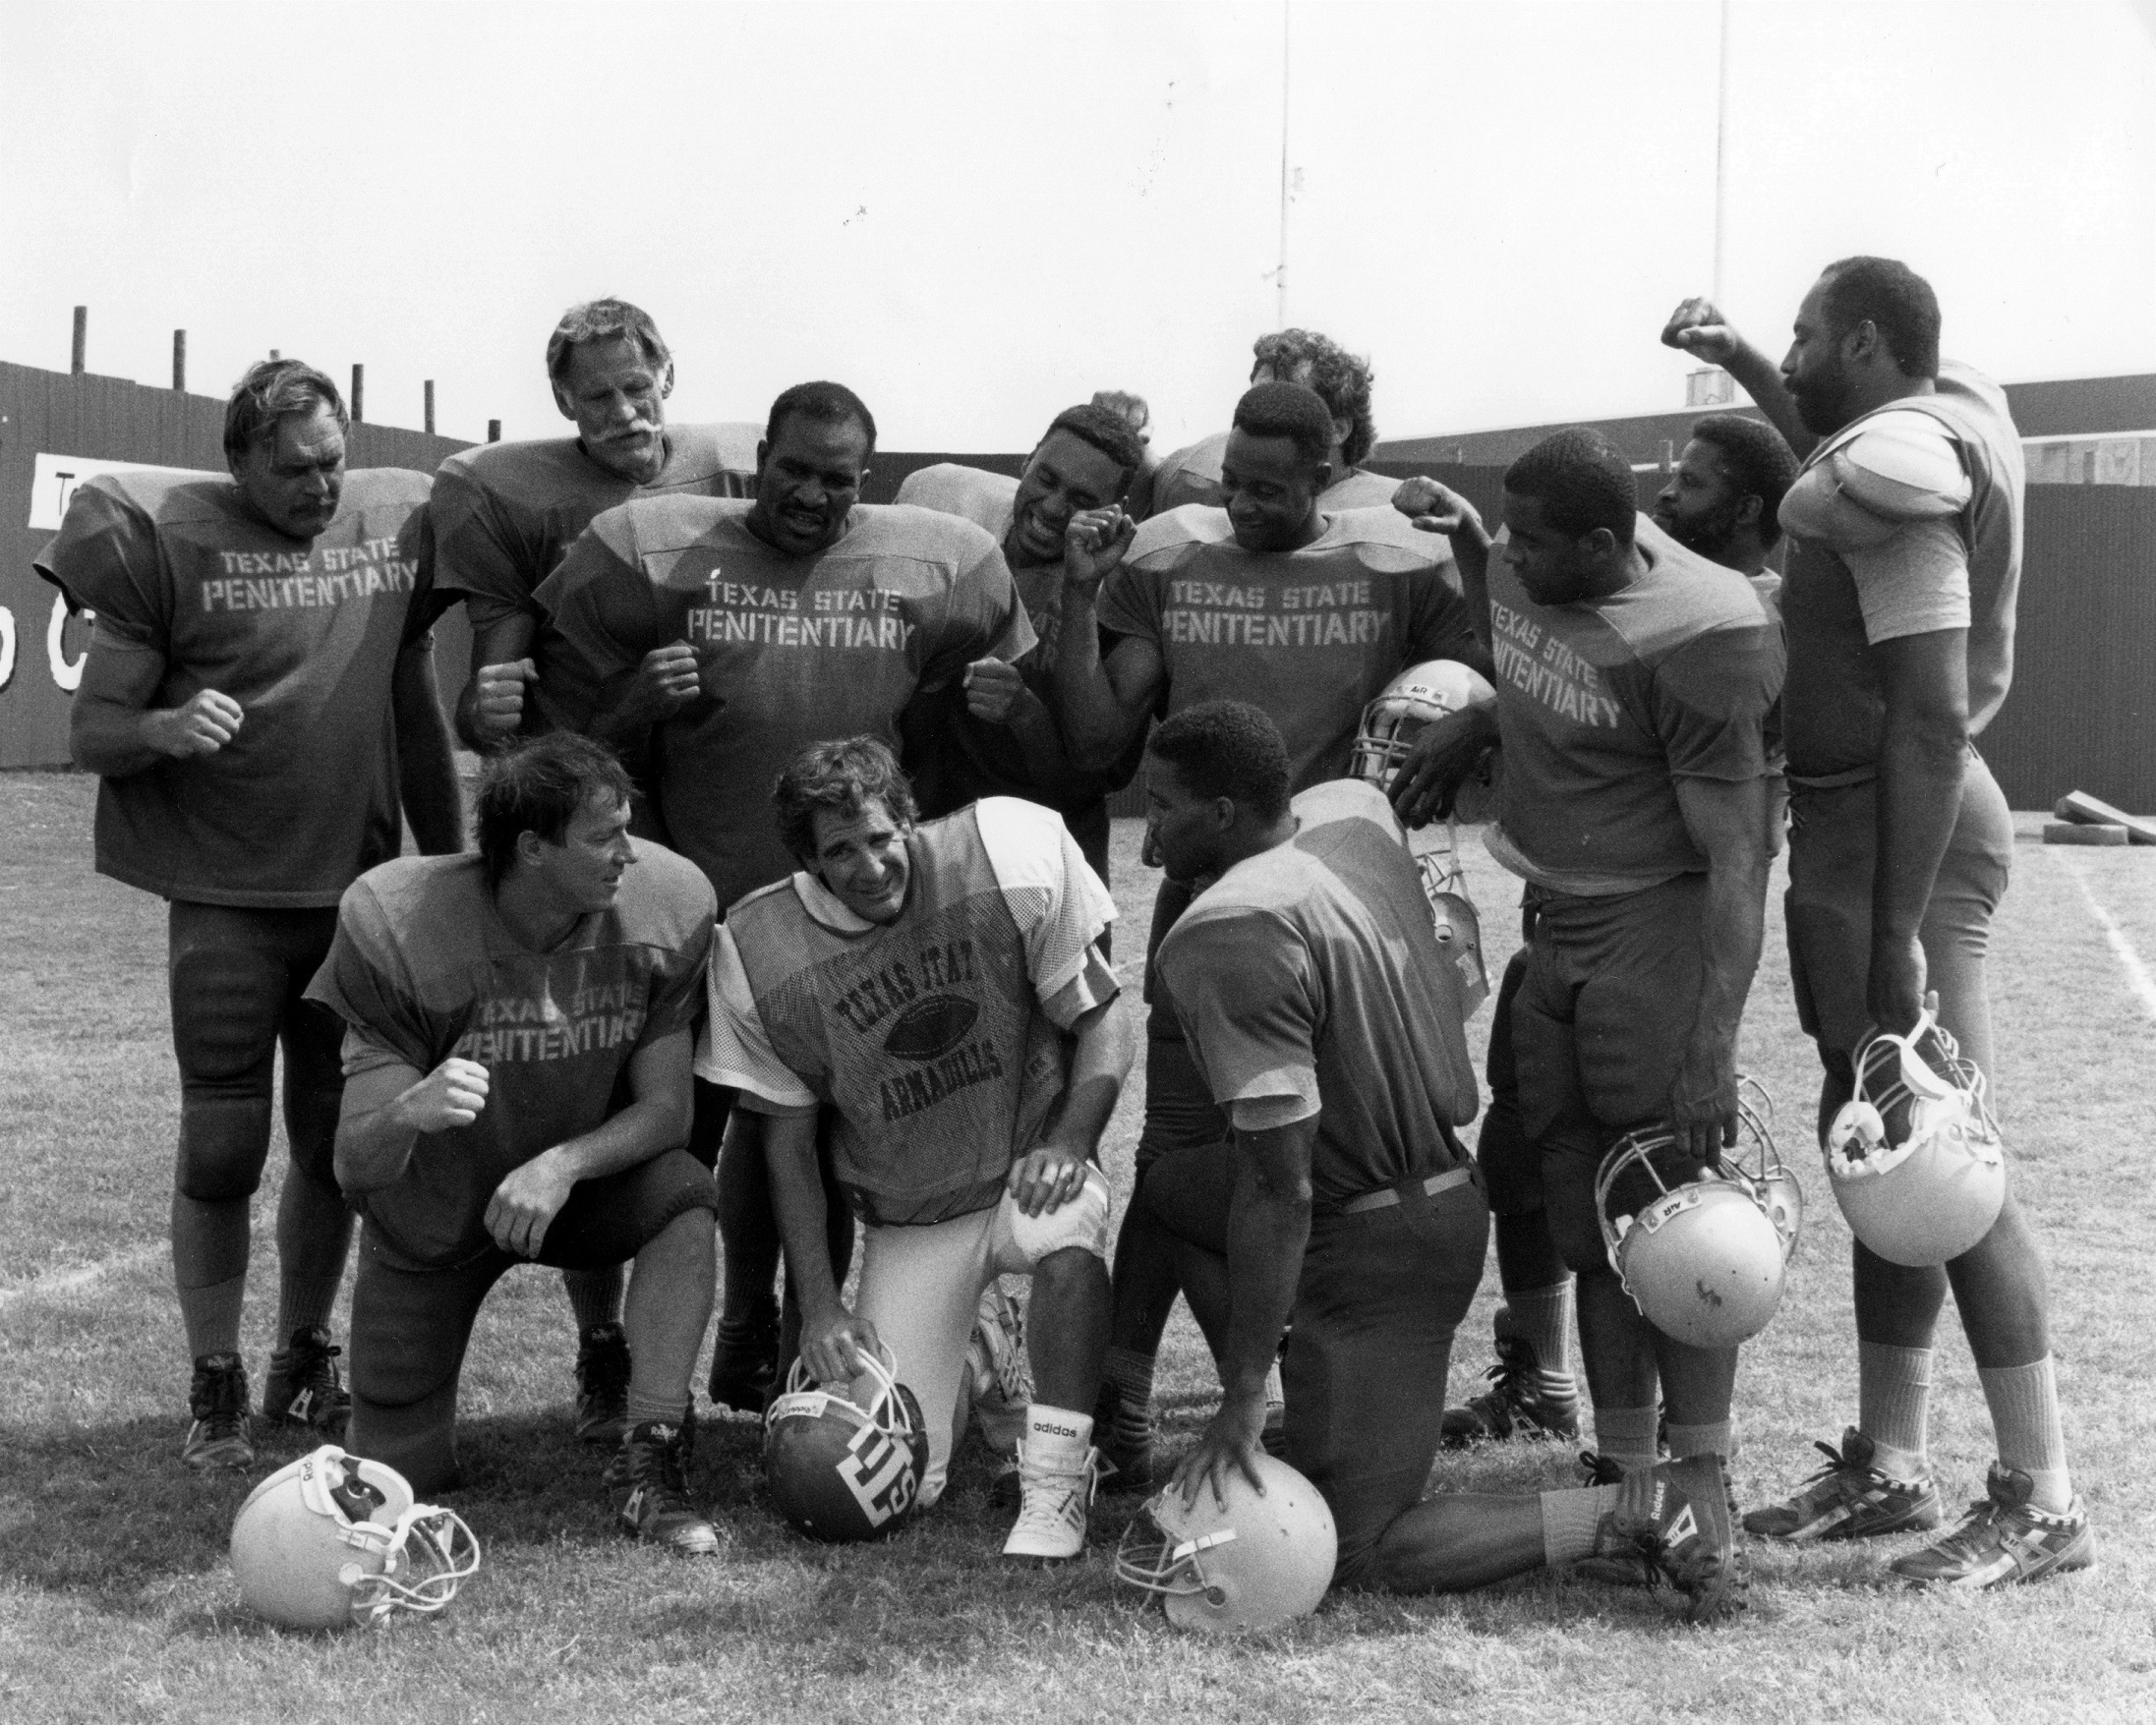 promotional photo of the movie Necessary Roughness' cast